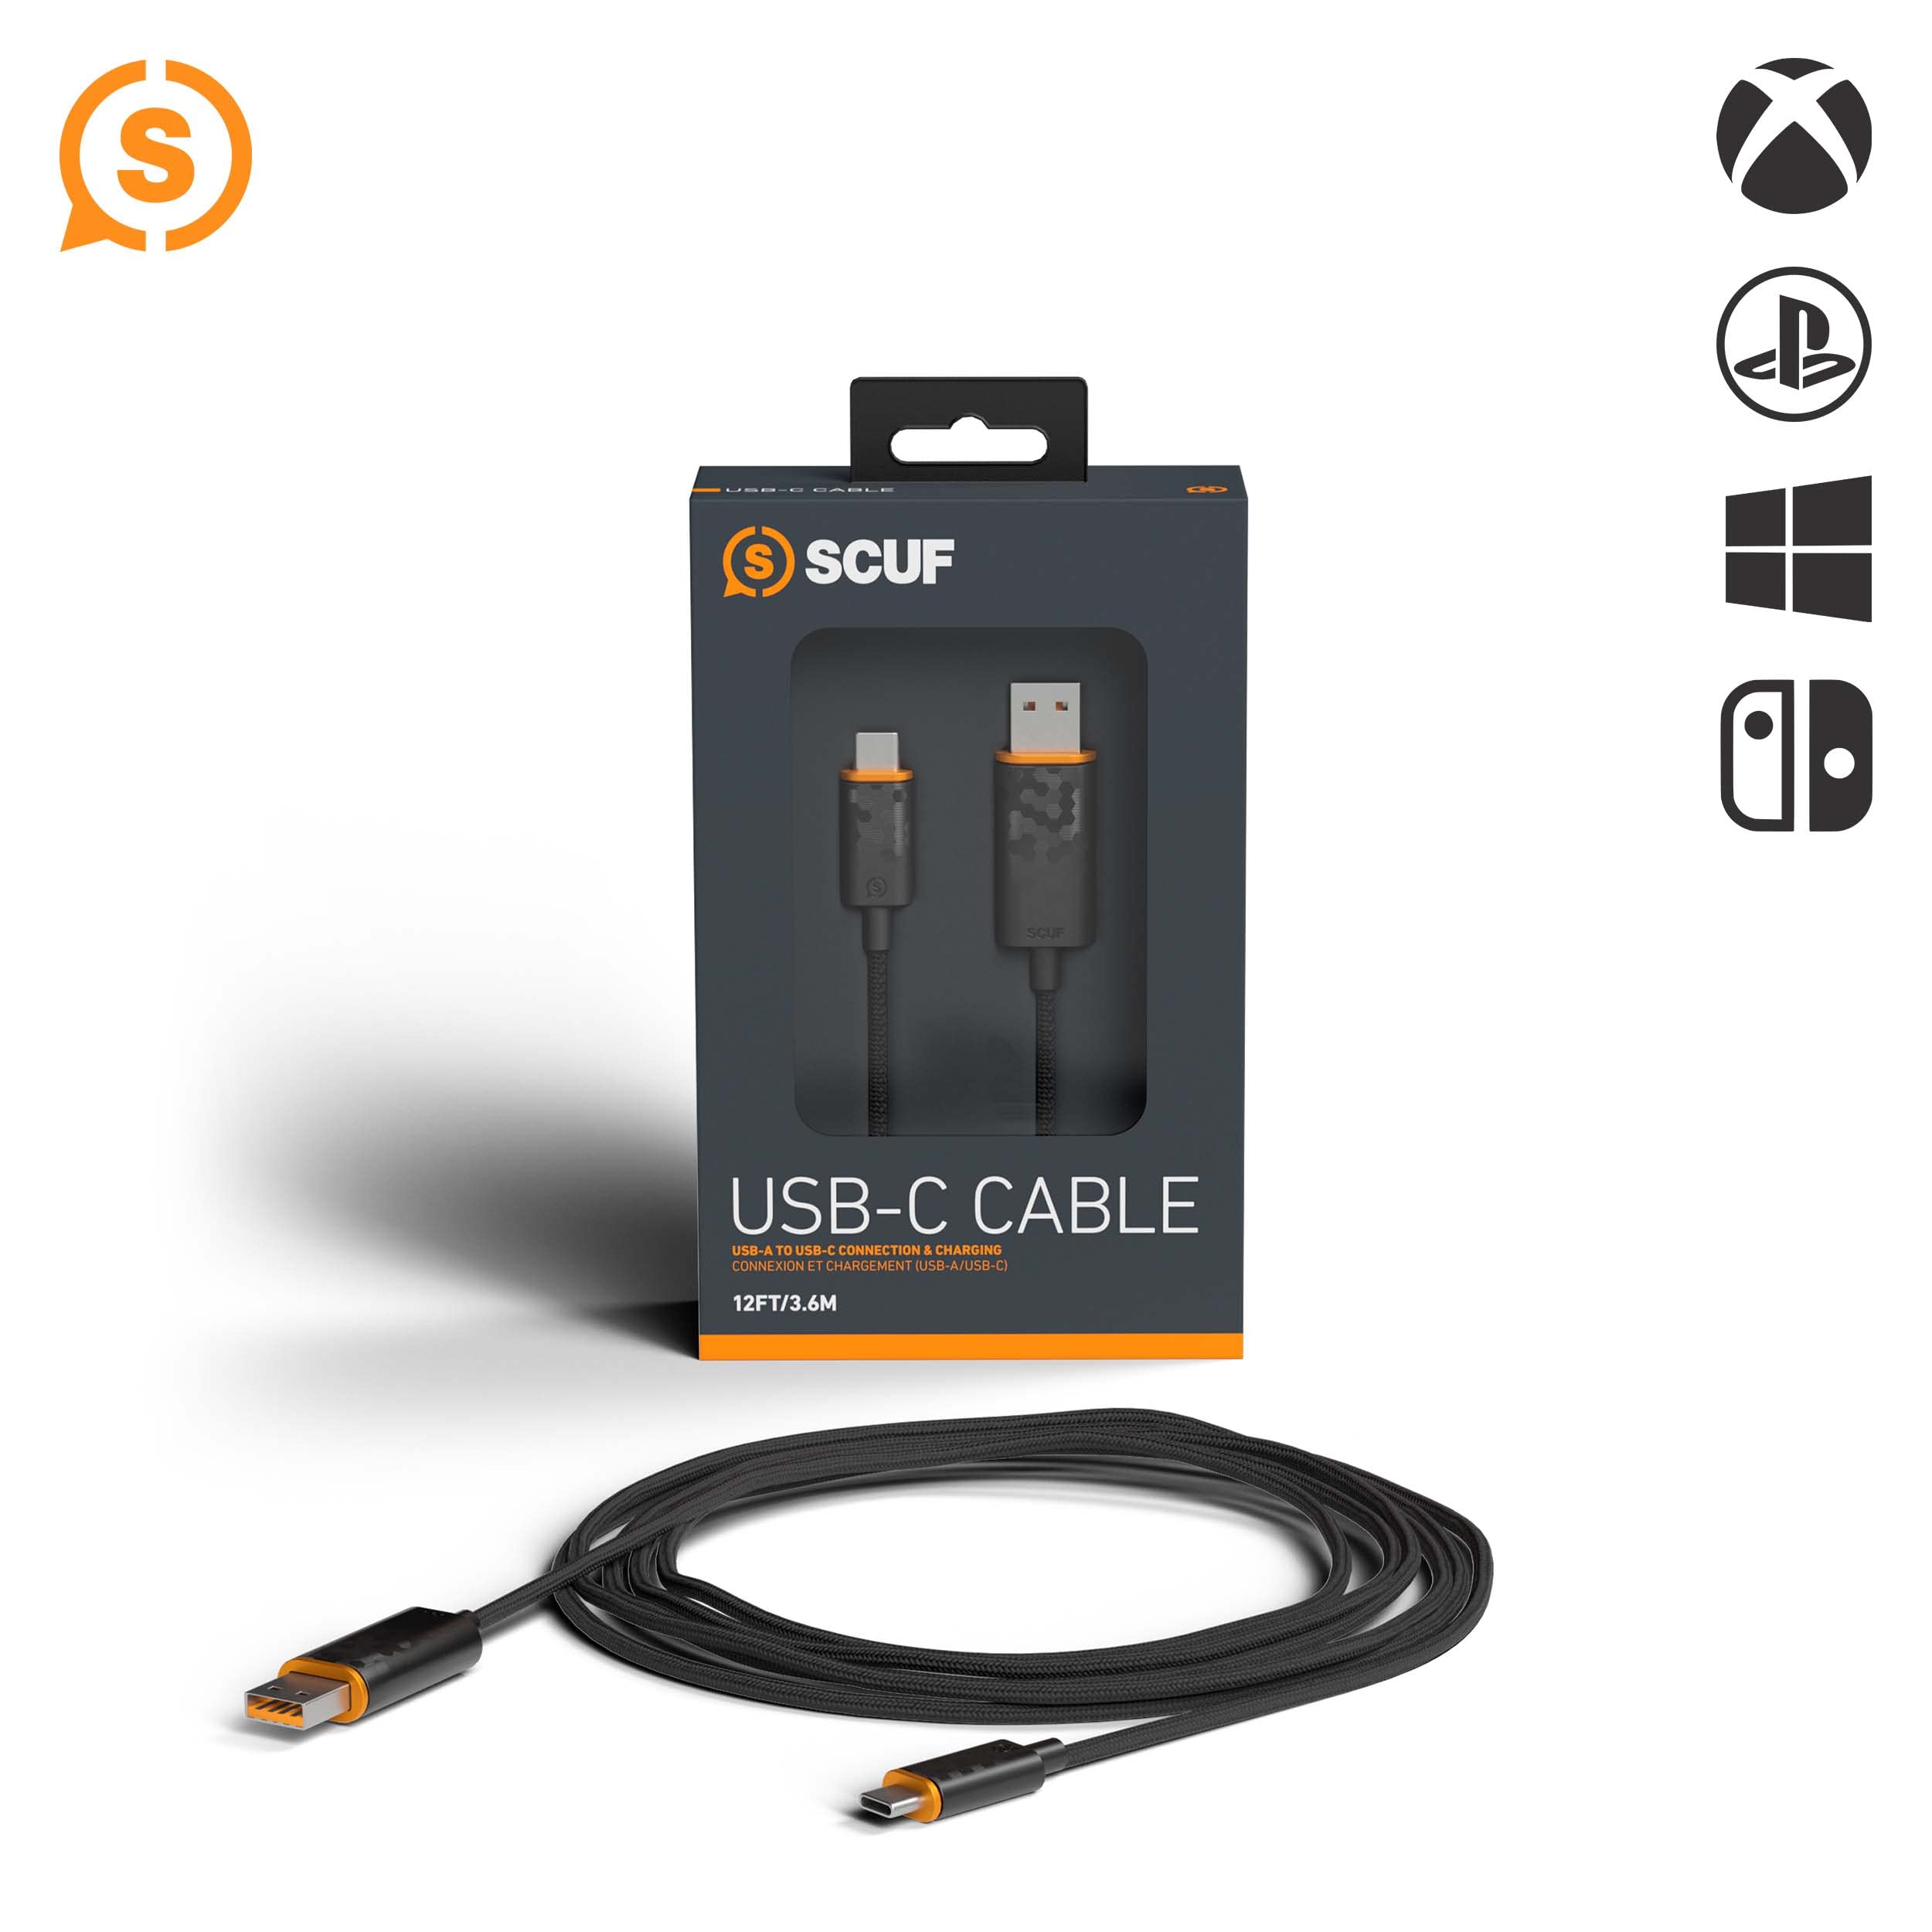 SCUF Braided USB-C Cable - Black 6 feet / 2 Meters USB Type C Connection and Charging for Xbox Controllers, PS5 Controllers, and Smart Phones - Xbox Series X;